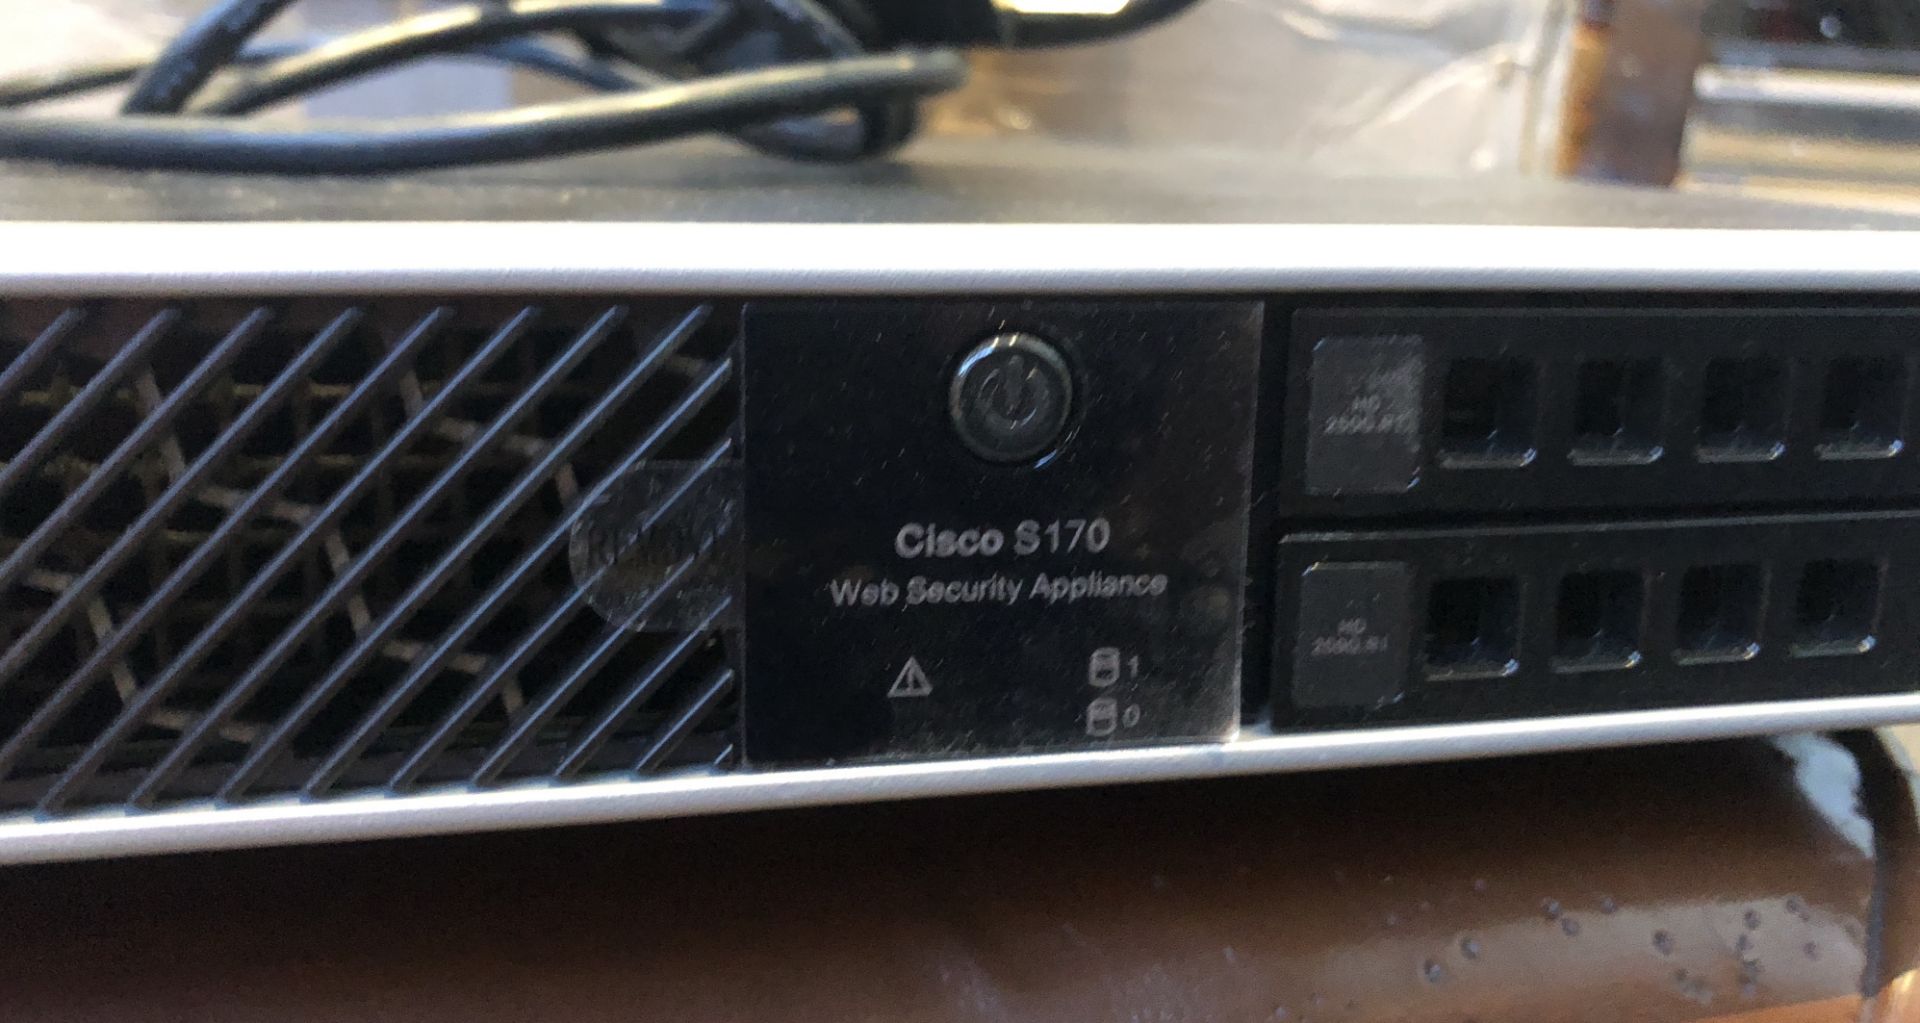 CISCO S170 WEB SECURITY APPLIANCE NETWORK EQUIPMENT - Image 4 of 4